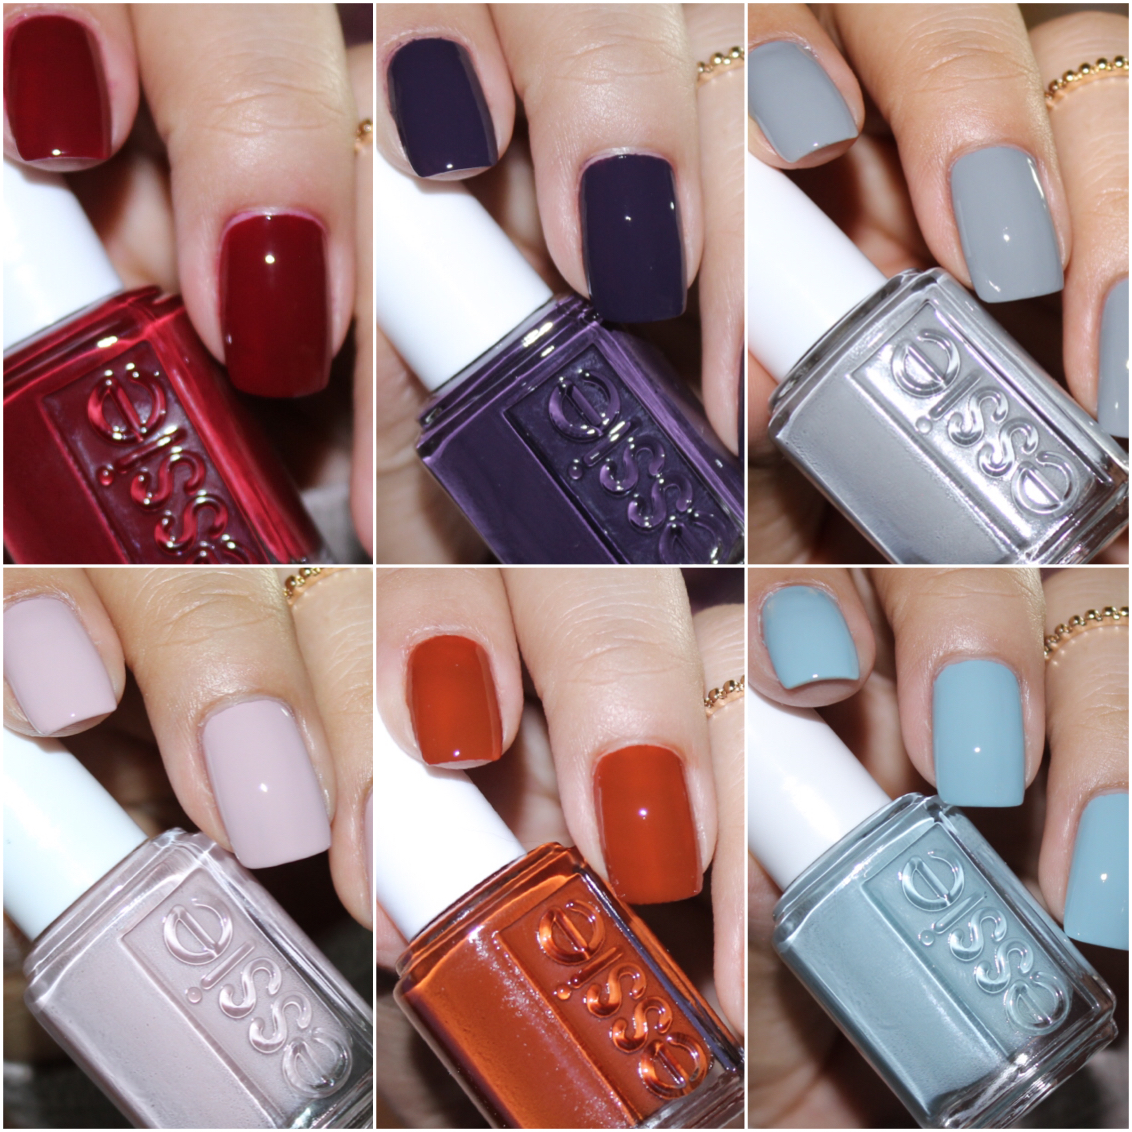 Simply Jary Essie S Kimono Over Fall 2016 Swatches And Review